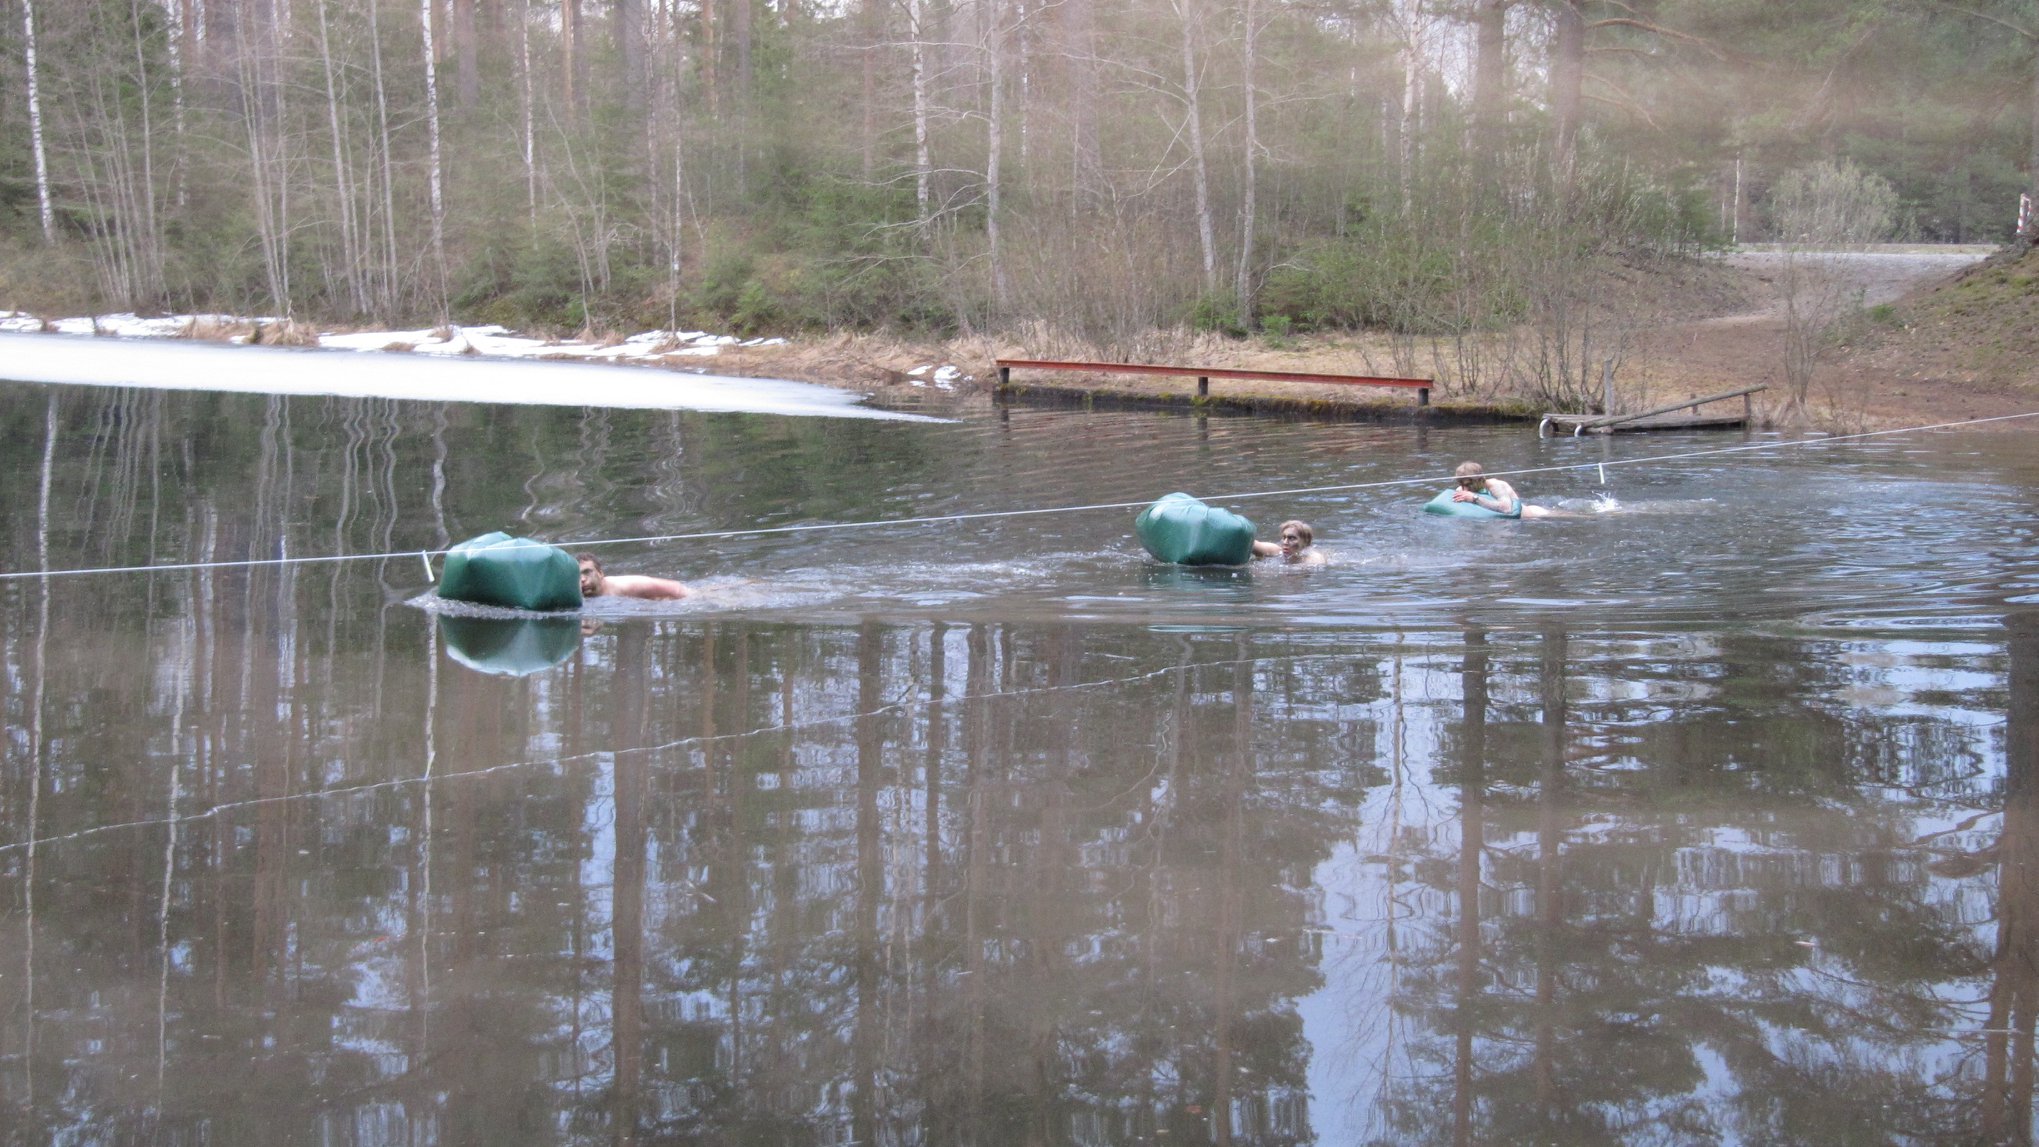 Three men swimming across a water with floating green bags. The water has some ice on it.